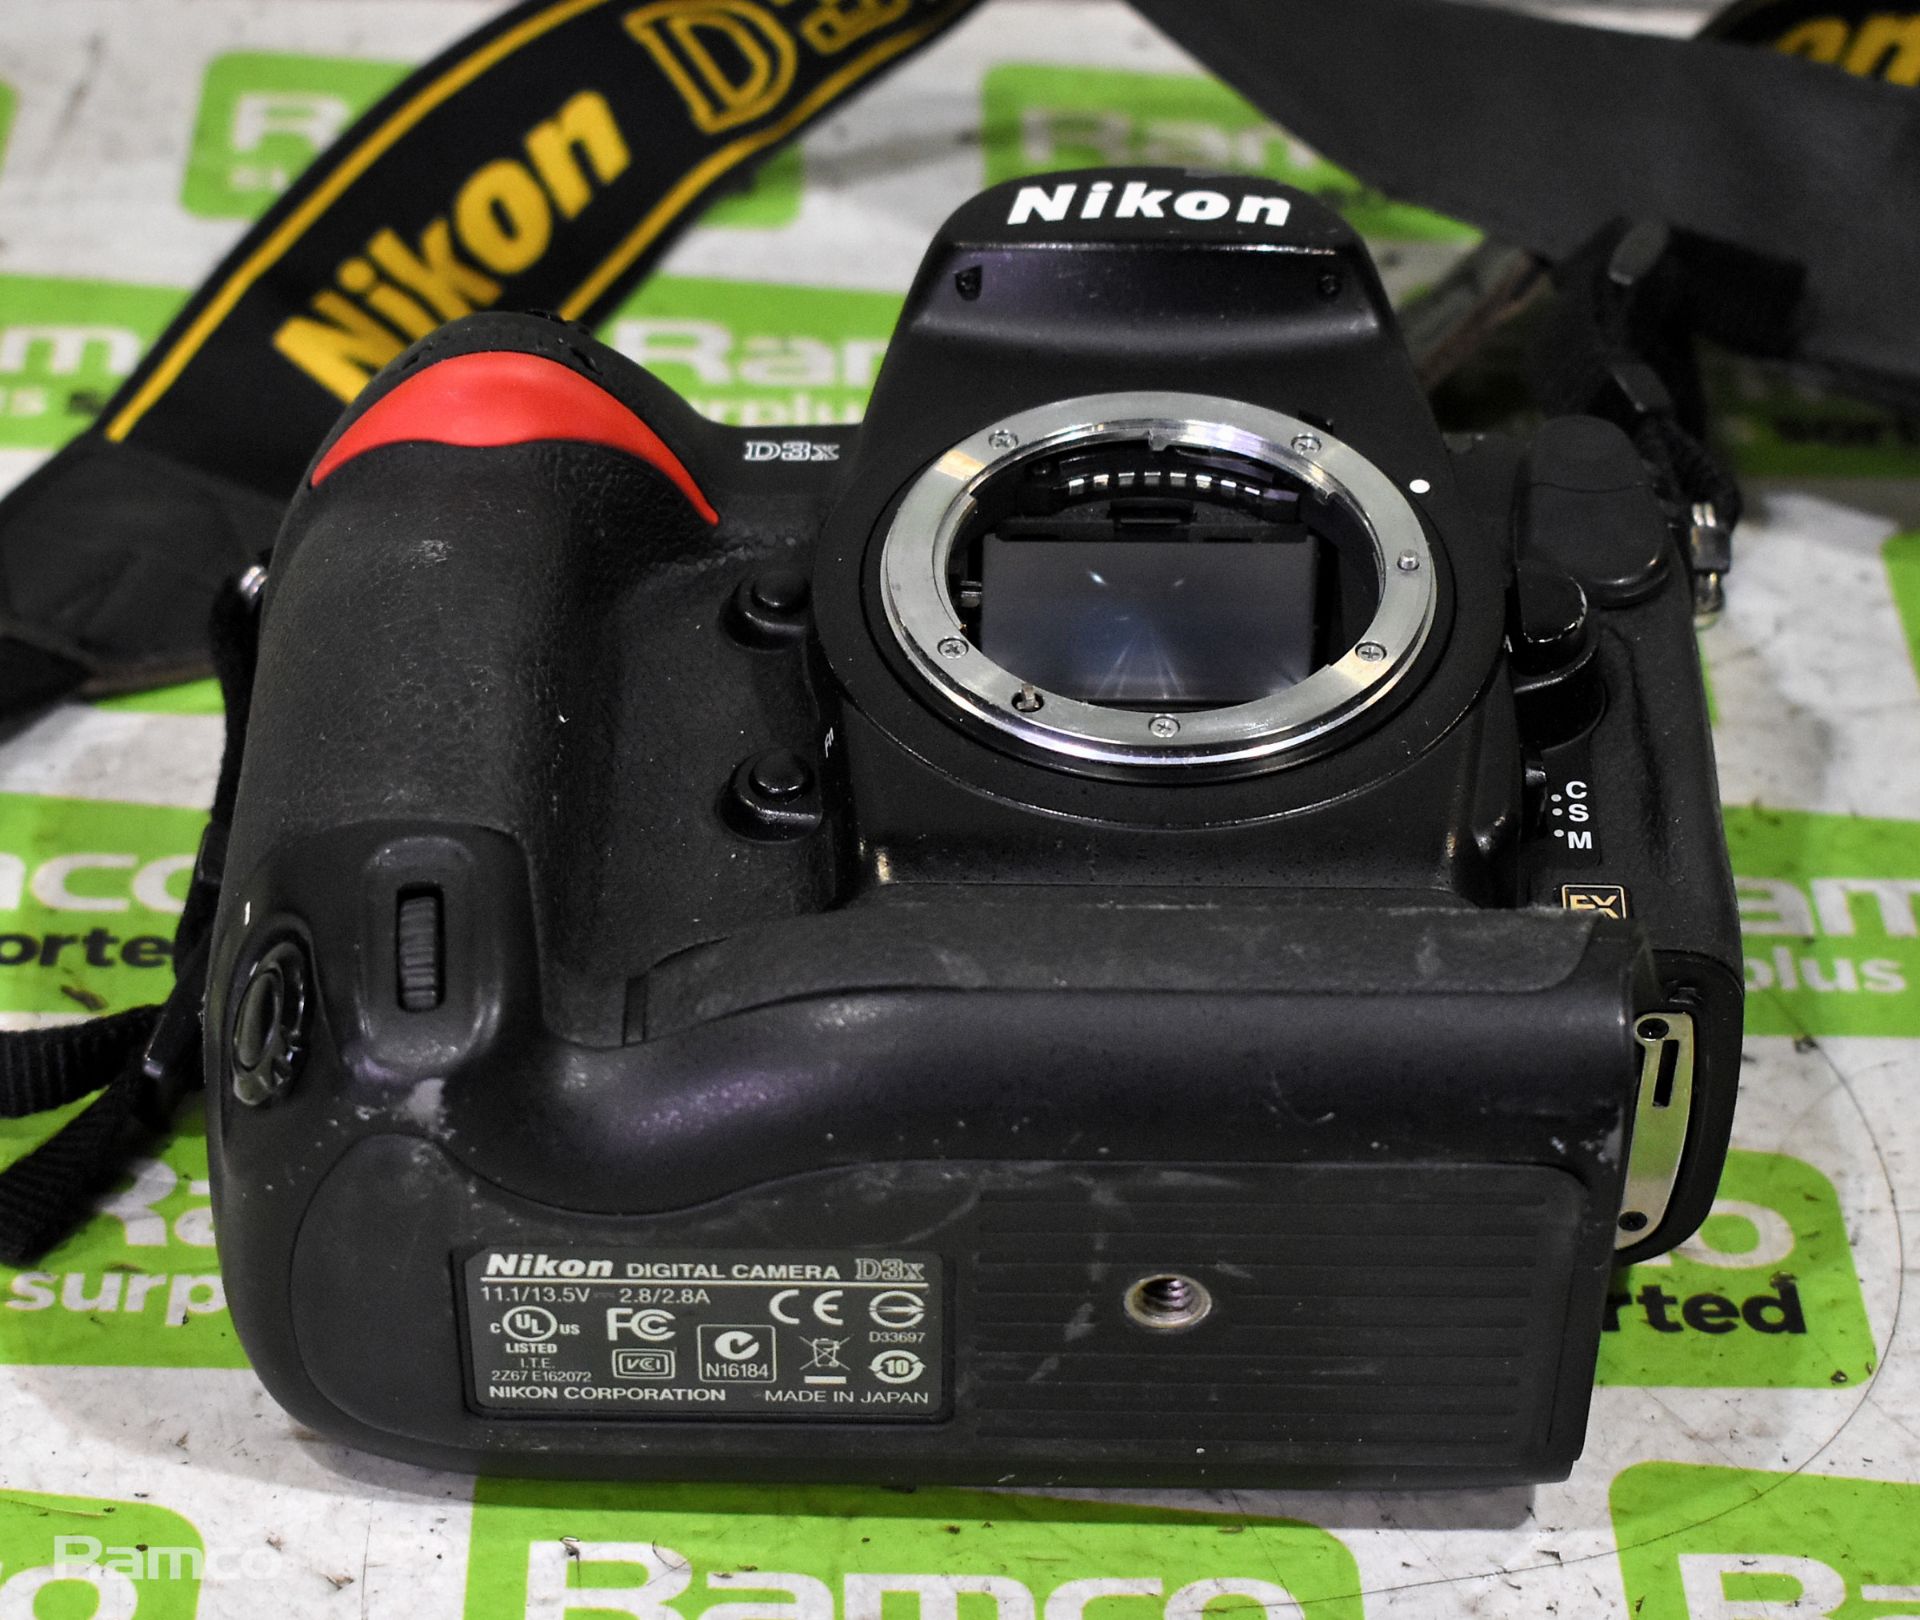 Nikon D3x Digital camera with Li-ion battery and MH-21 fast charger - Image 8 of 14